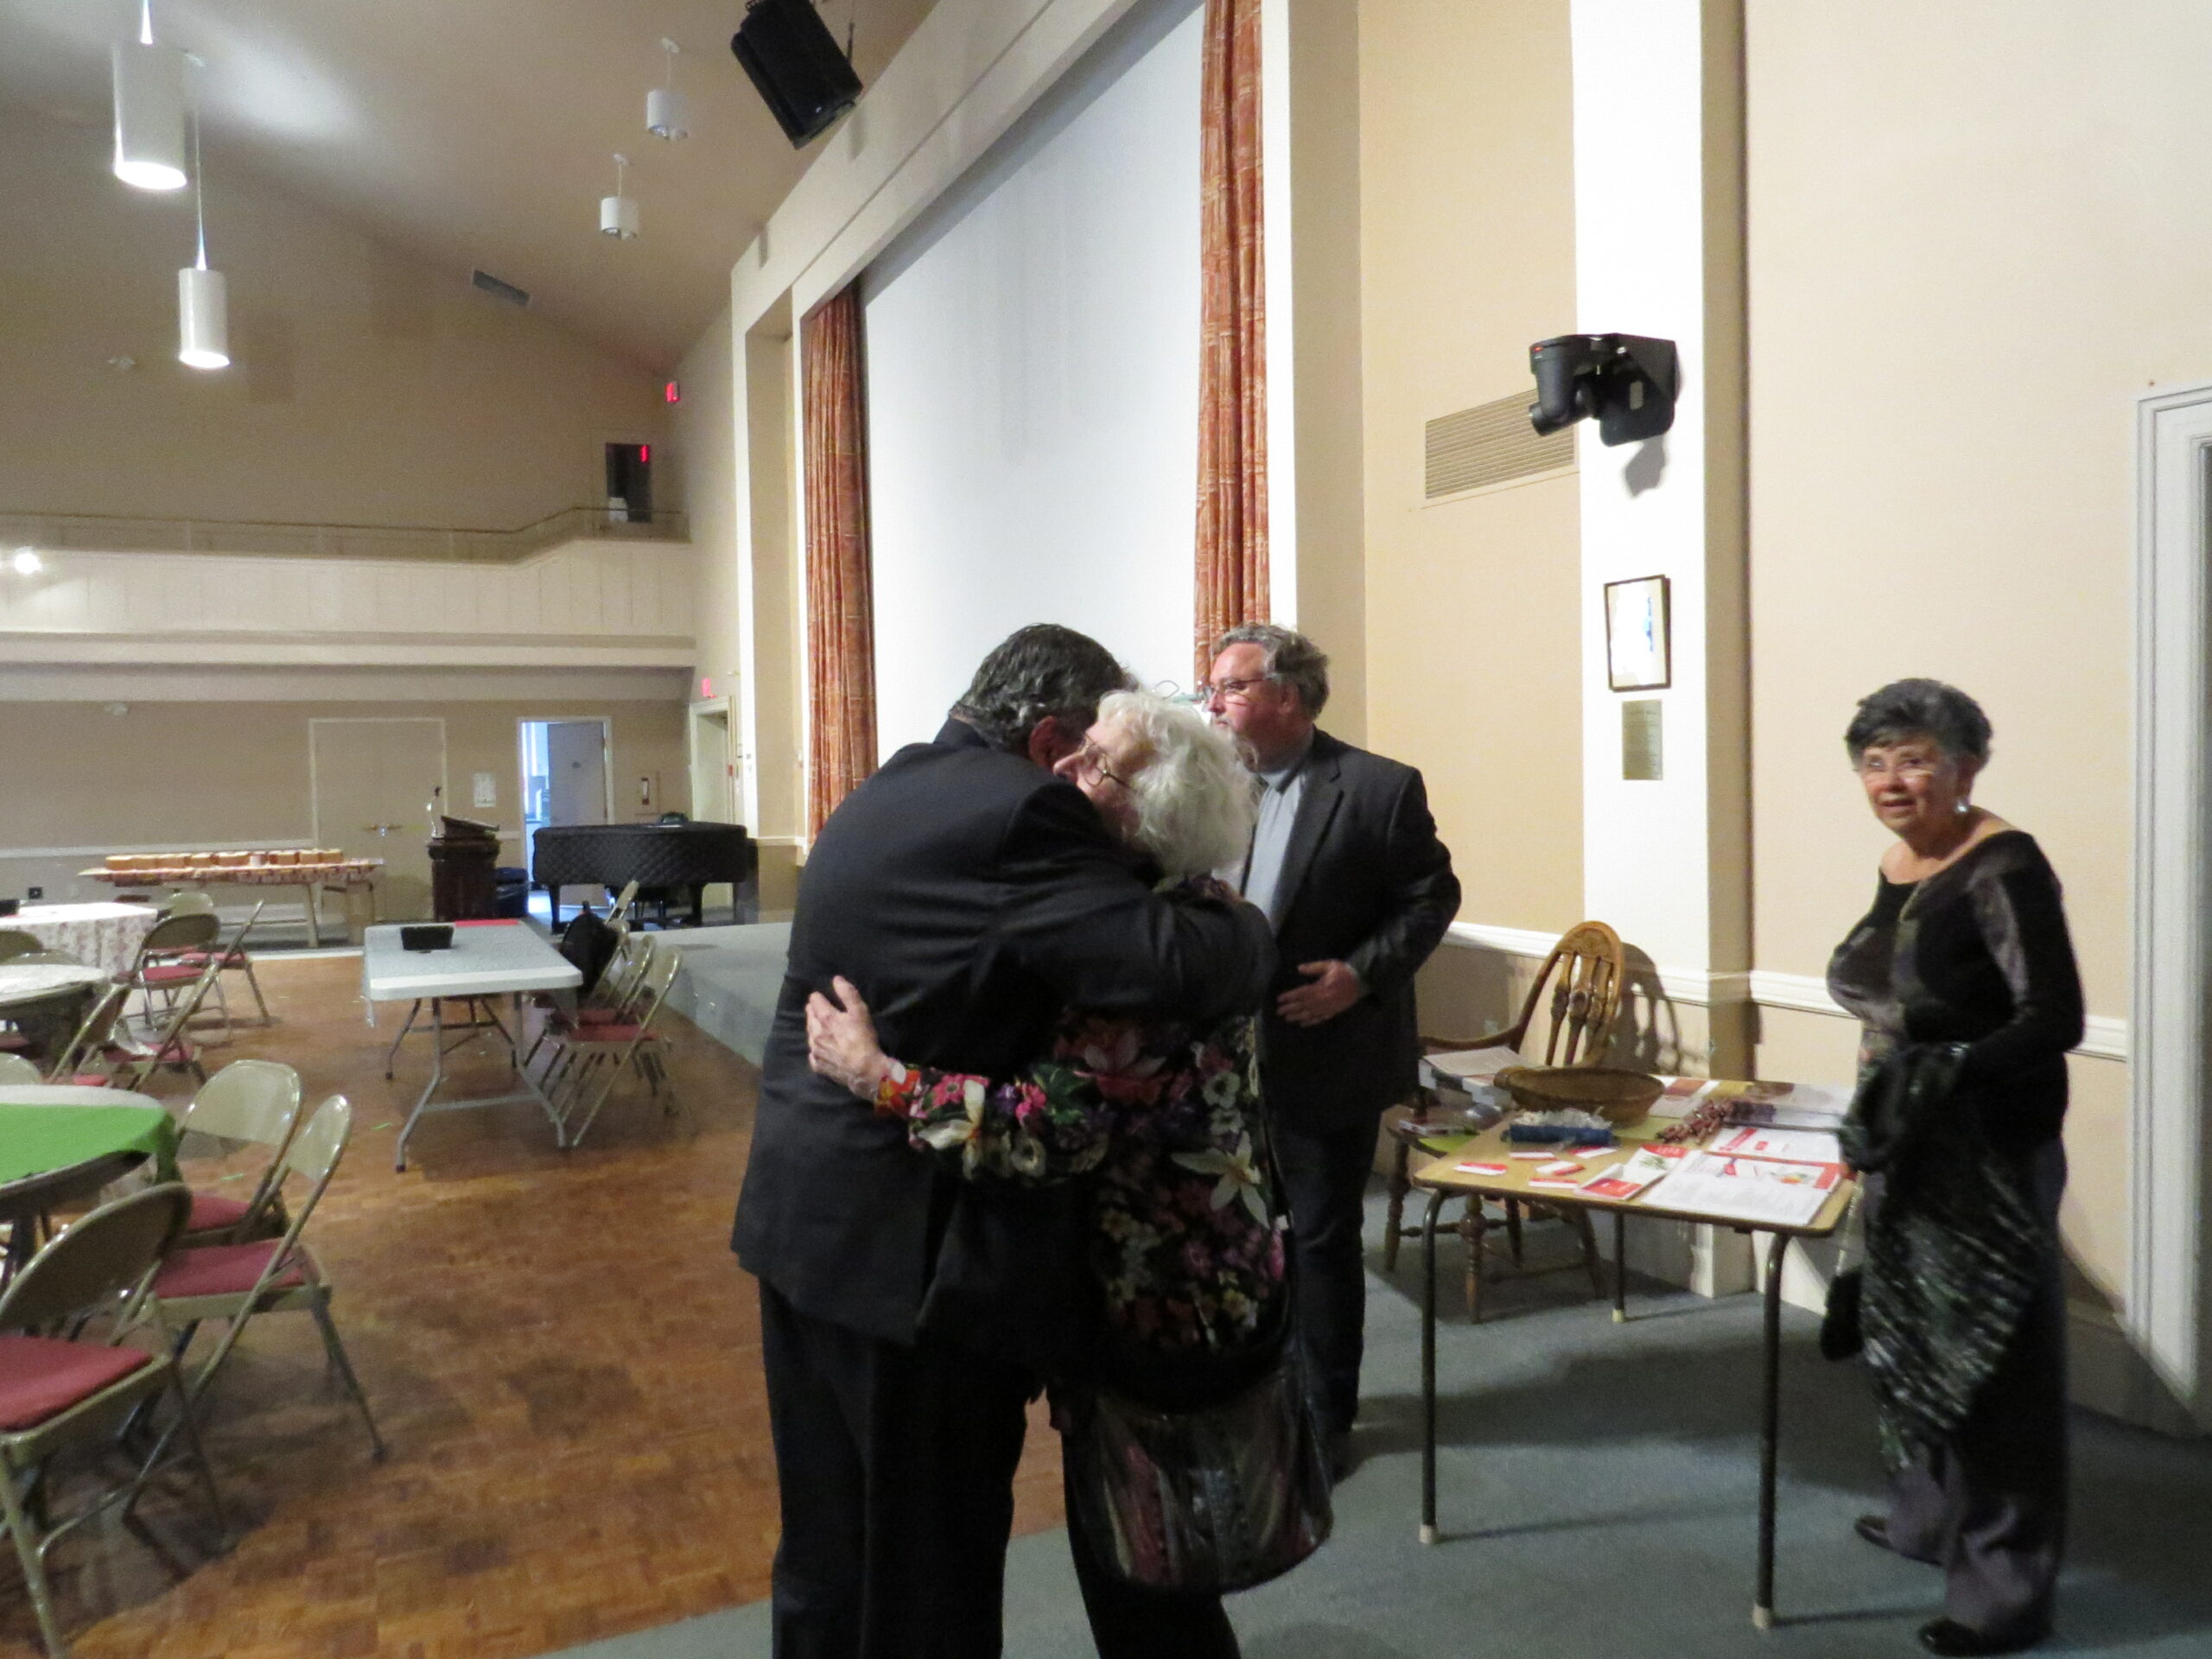 Richard embracing Janet Somerville, General Secretary of the Council from 1997 - 2002 during festivities for the 75th Anniversary of the Council on September 26, 2019. Many of us will remember Richard's warm affection for so many he encountered.